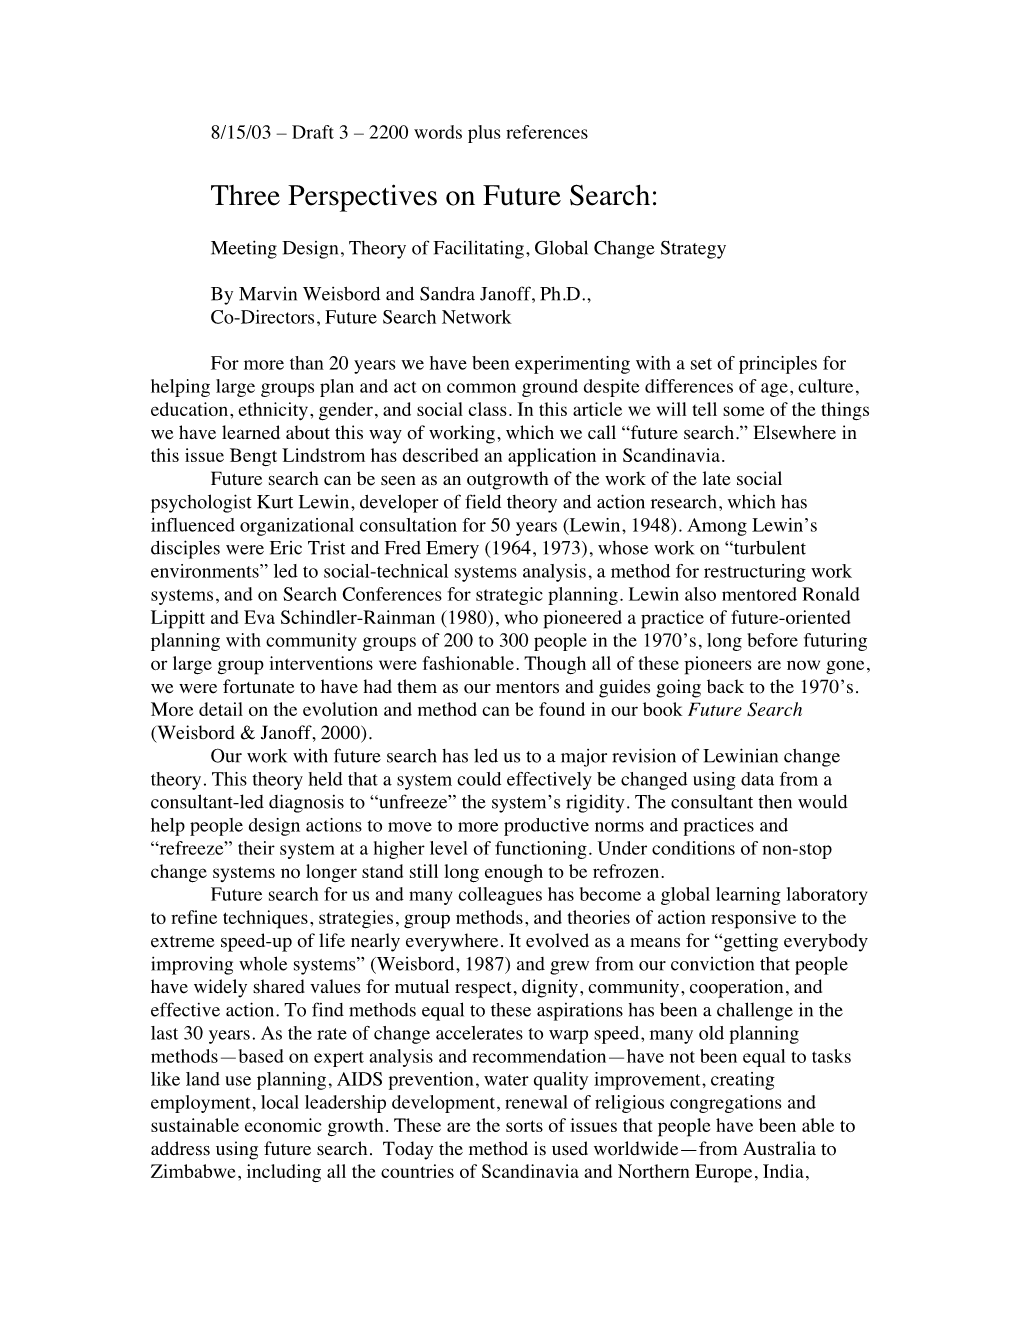 Three Perspectives on Future Search